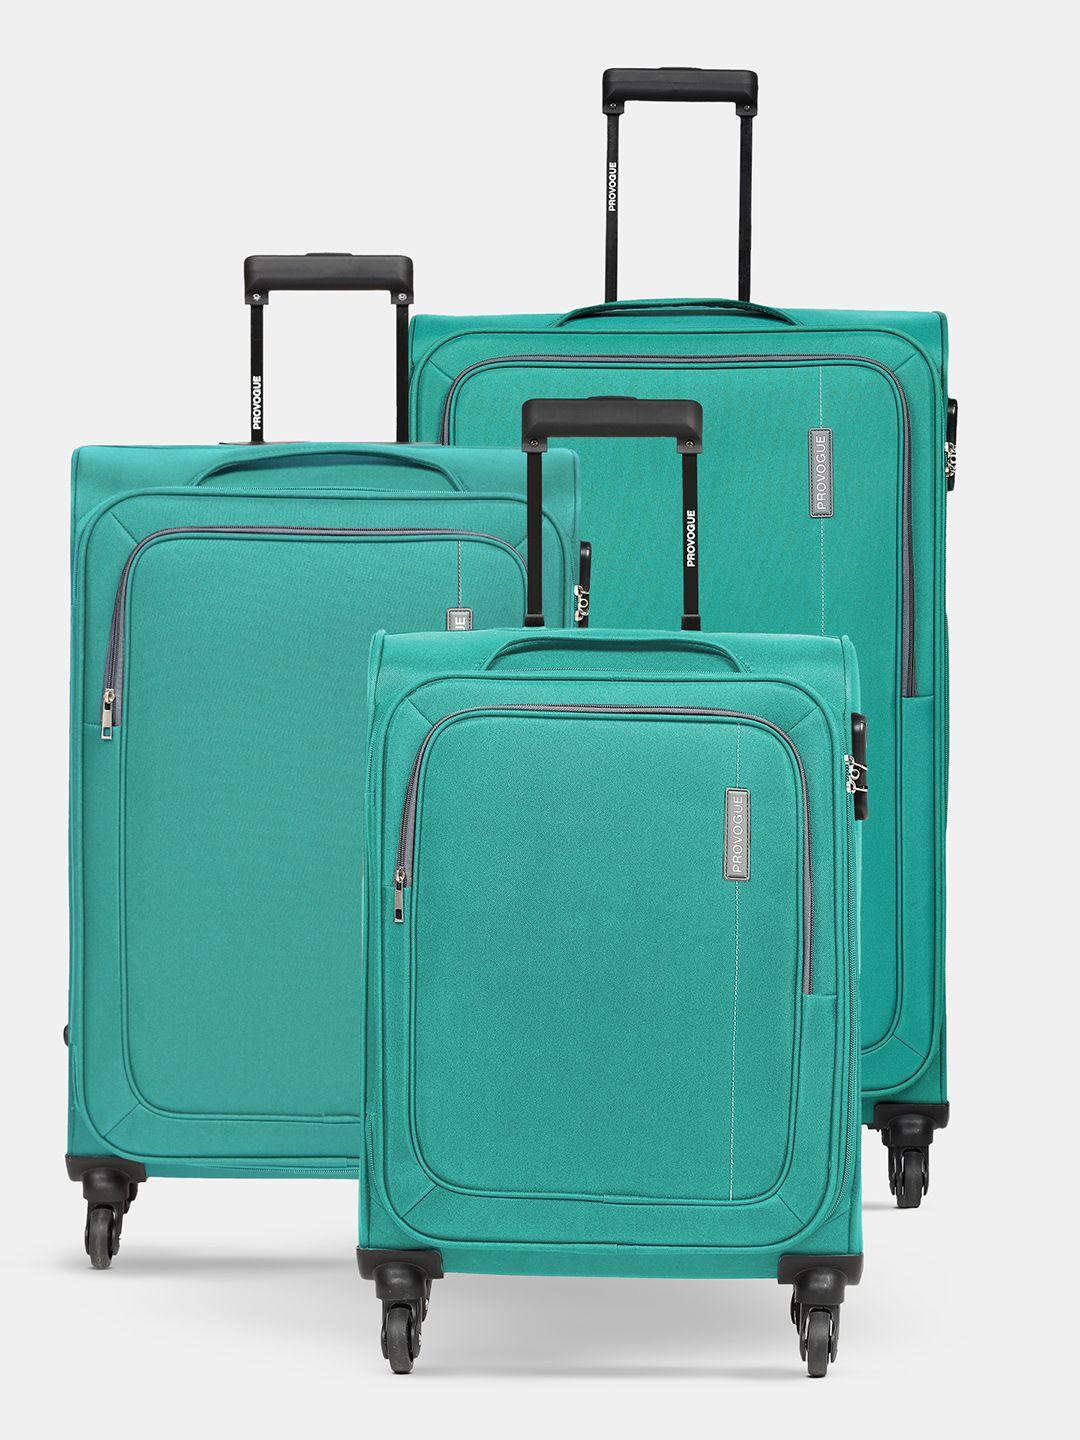 provogue soft body set of 3 small, medium & large size trolley suitcases